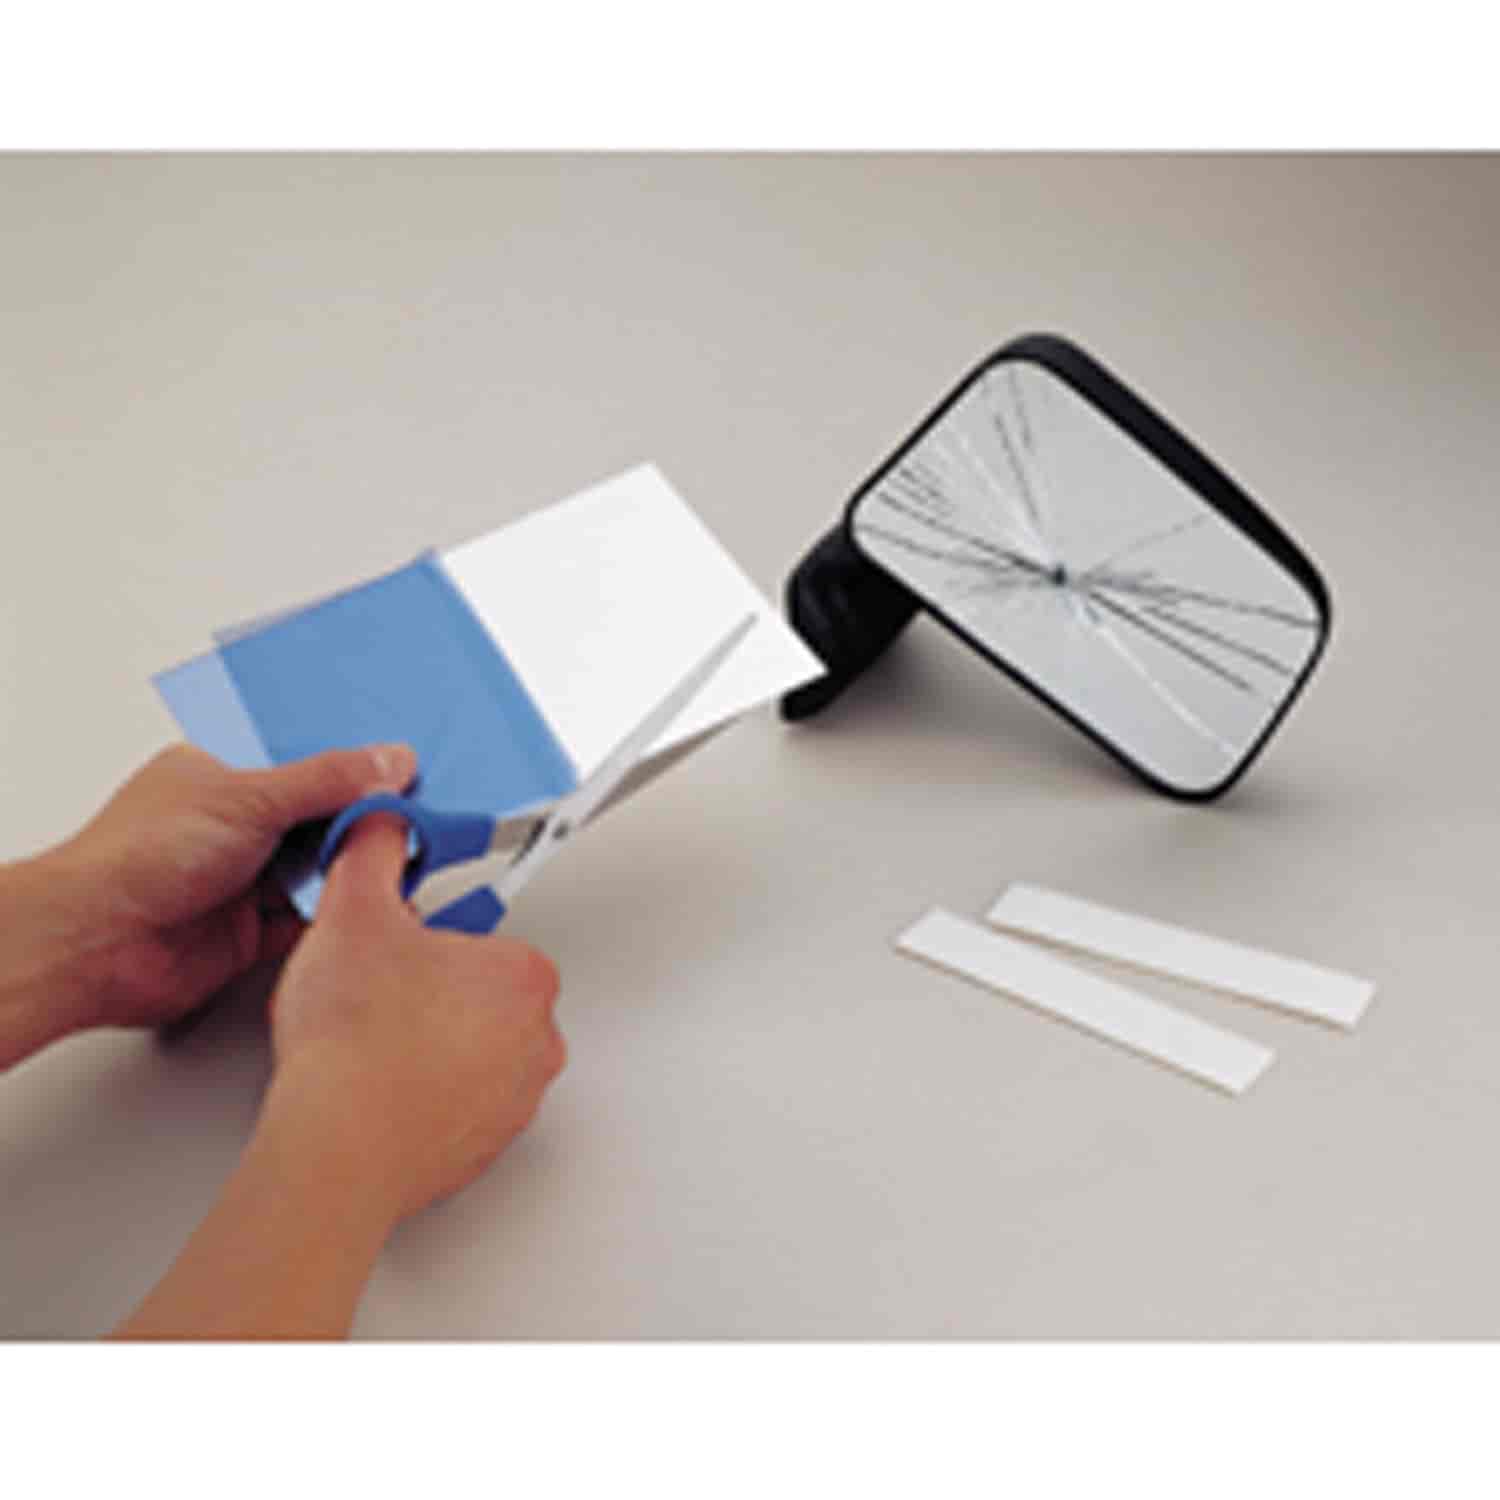 Cut to Fit Lense Small 5 x 8 Easy Fix for Broken Mirror Glass Includes Adhesive for mounting Easily Cut to exact shape needed.